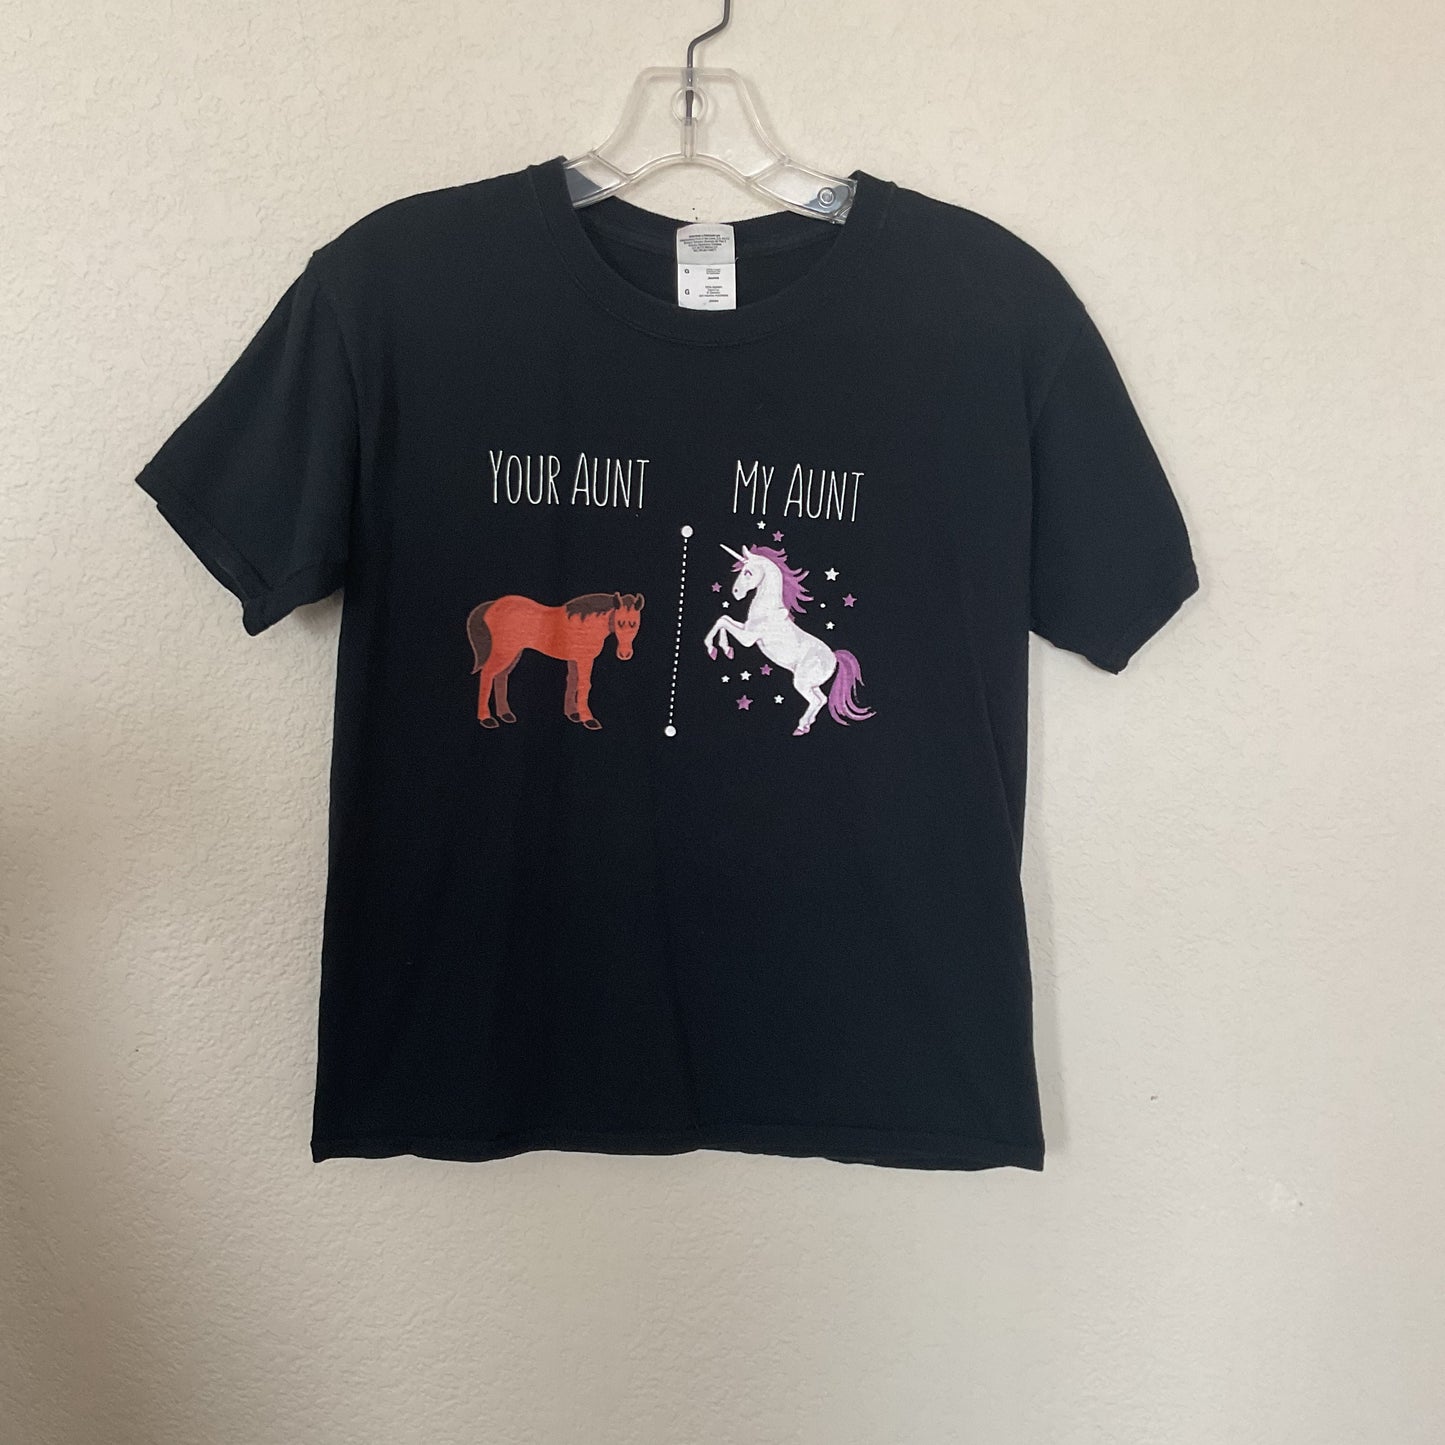 Fruit Of The Loom Girls Graphics T-shirt Size L(10/12).